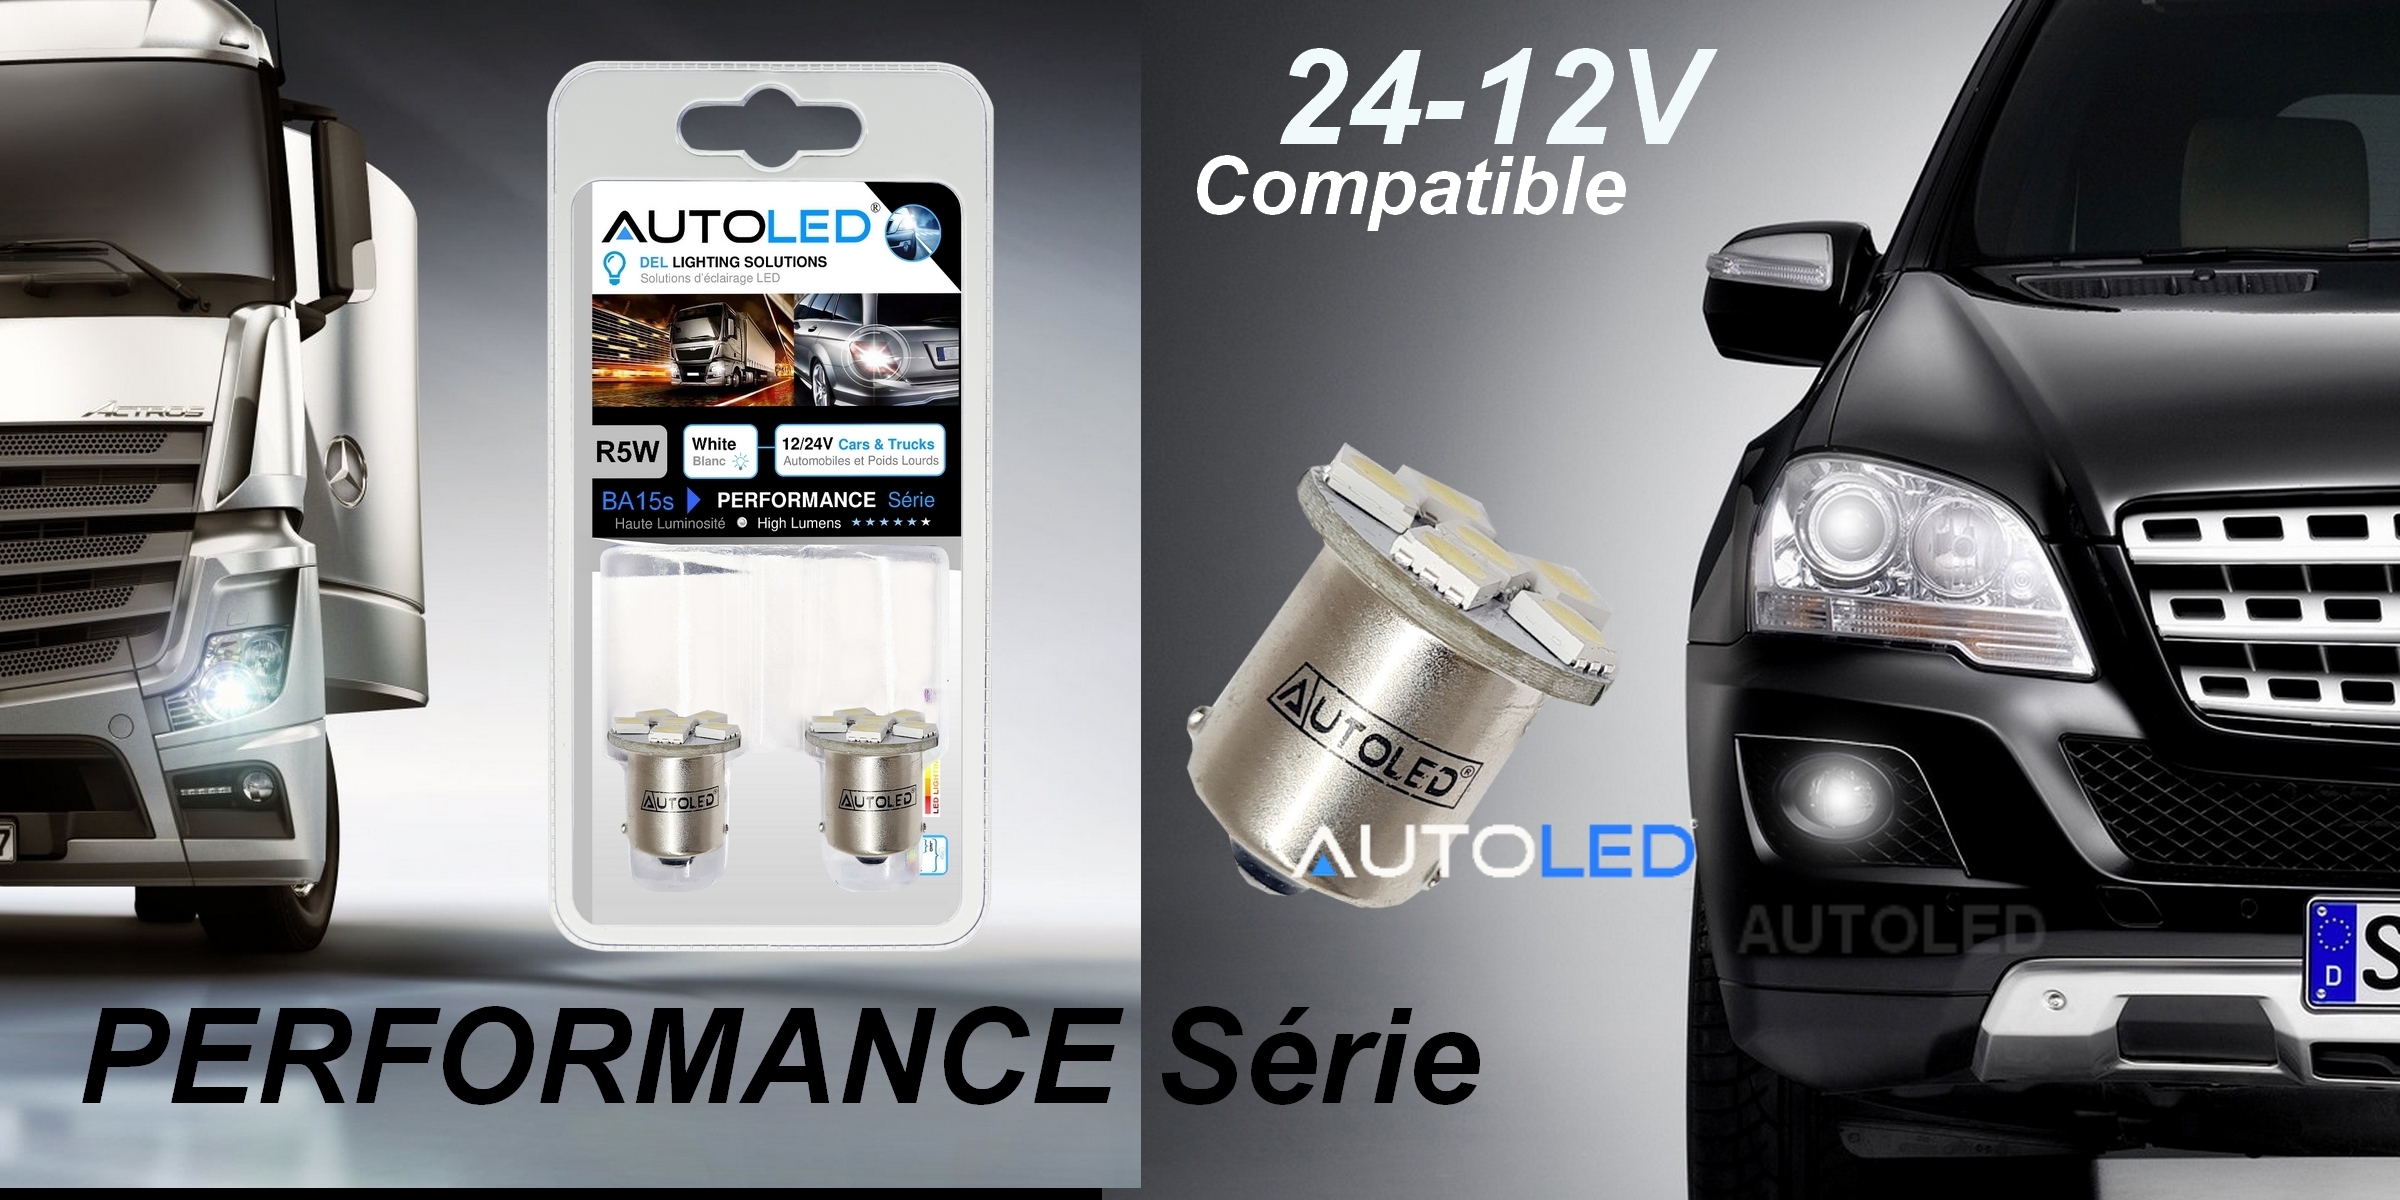 R5w Led - Achat neuf ou d'occasion pas cher